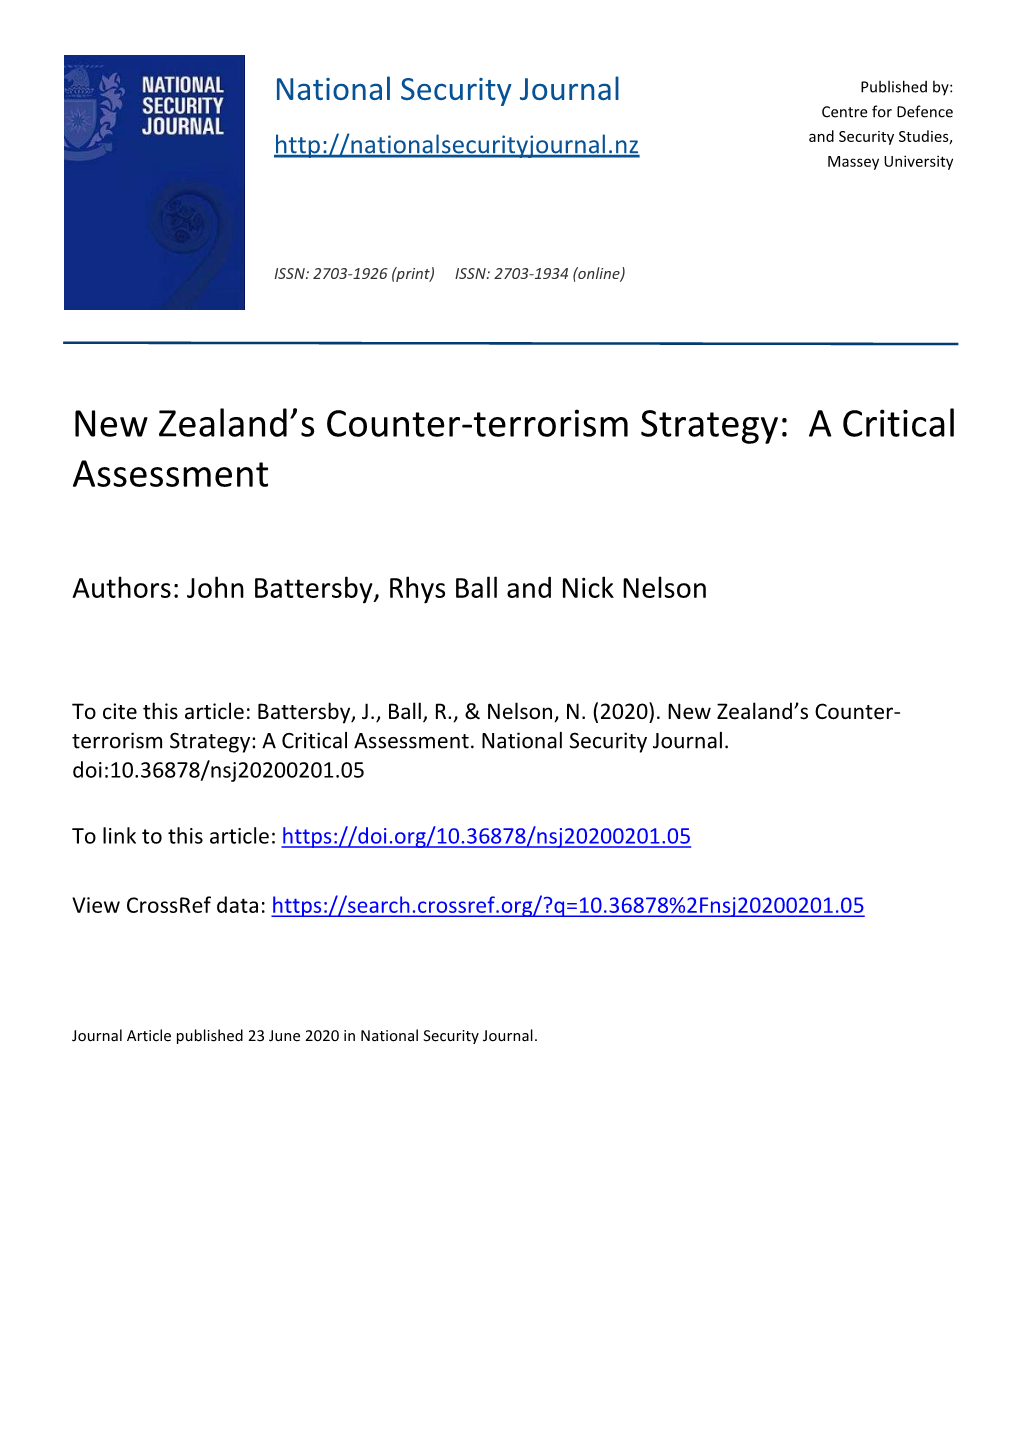 New Zealand's Counter-Terrorism Strategy